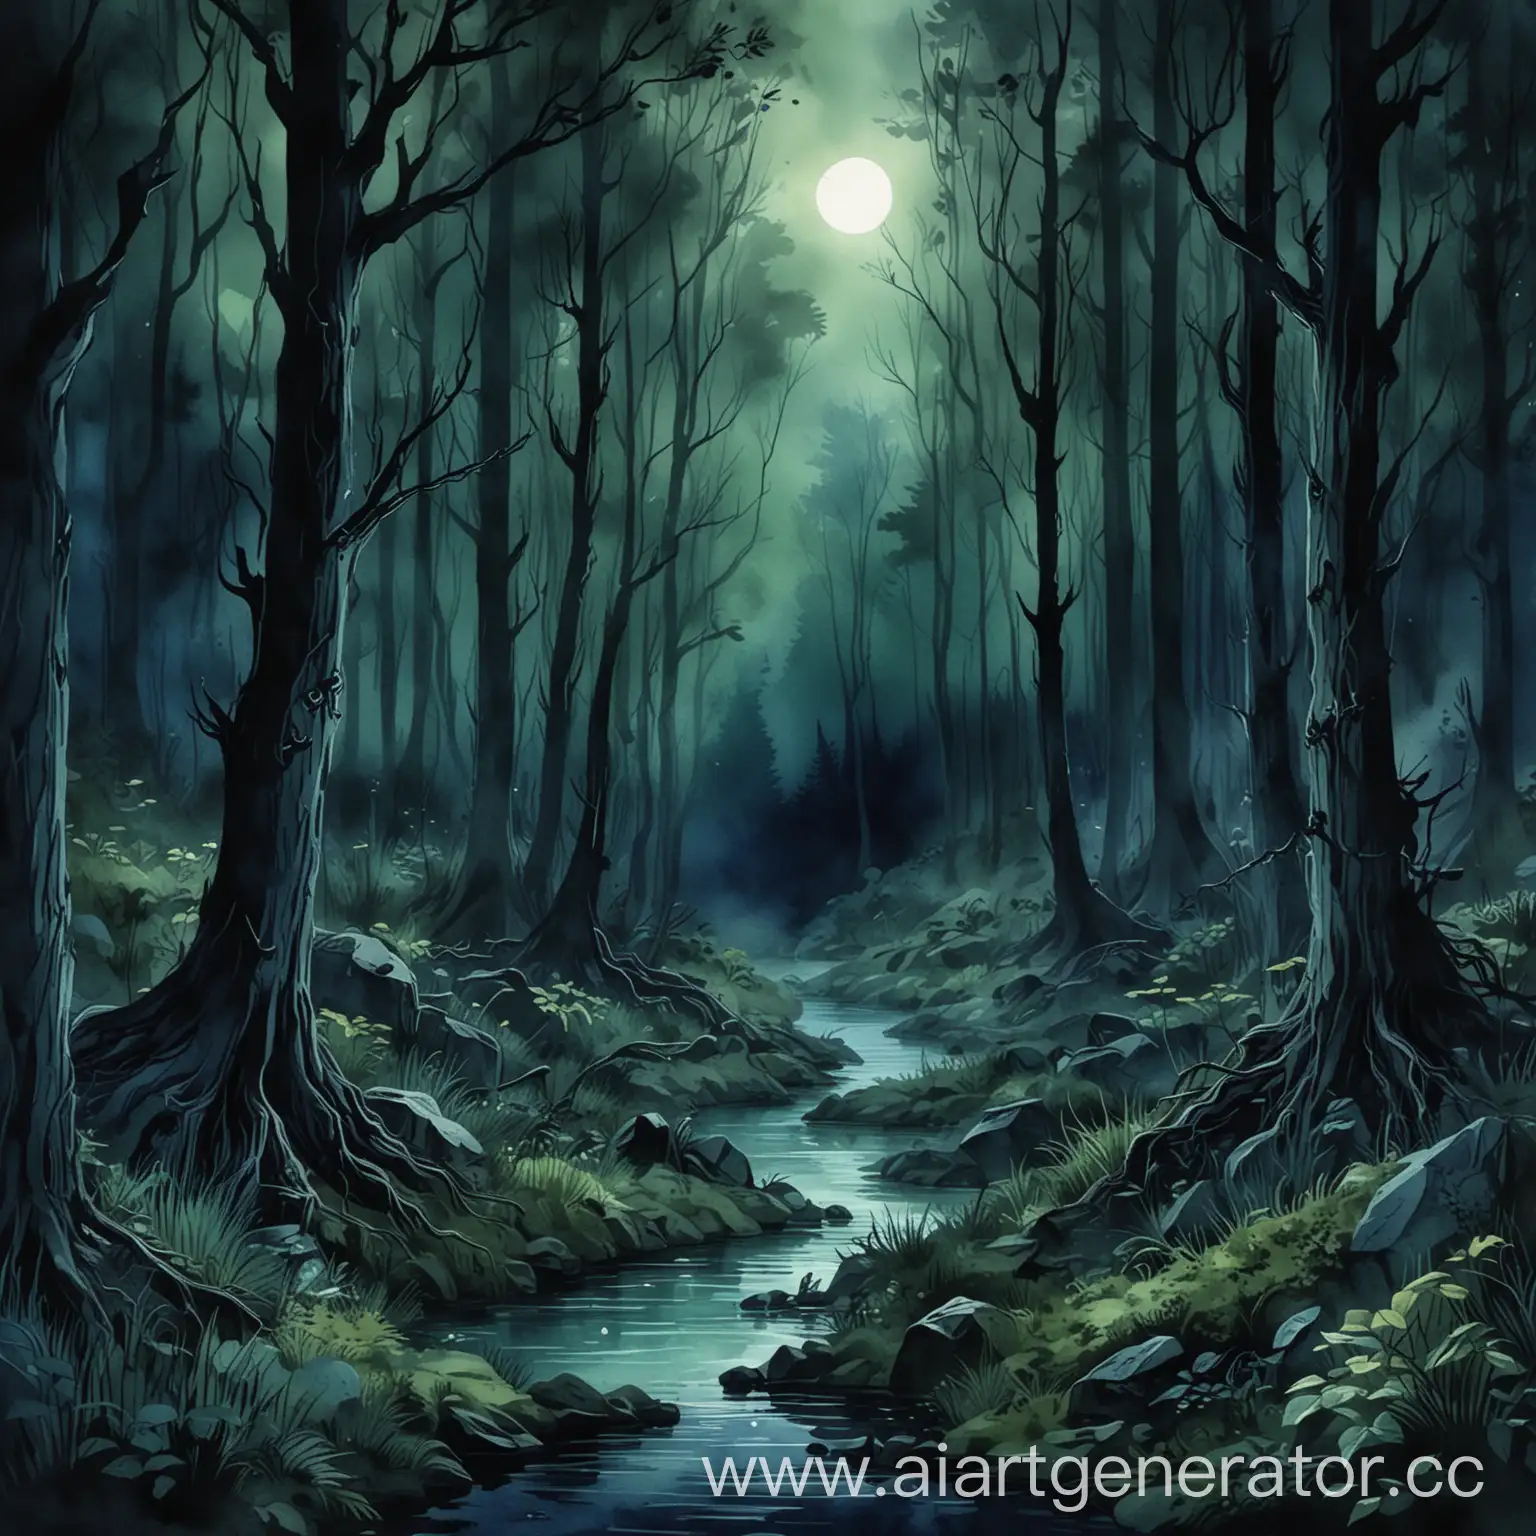 Dark-Forest-Night-Scene-Inspired-by-Lord-of-the-Rings-Simple-Watercolor-with-Blurred-Shadows